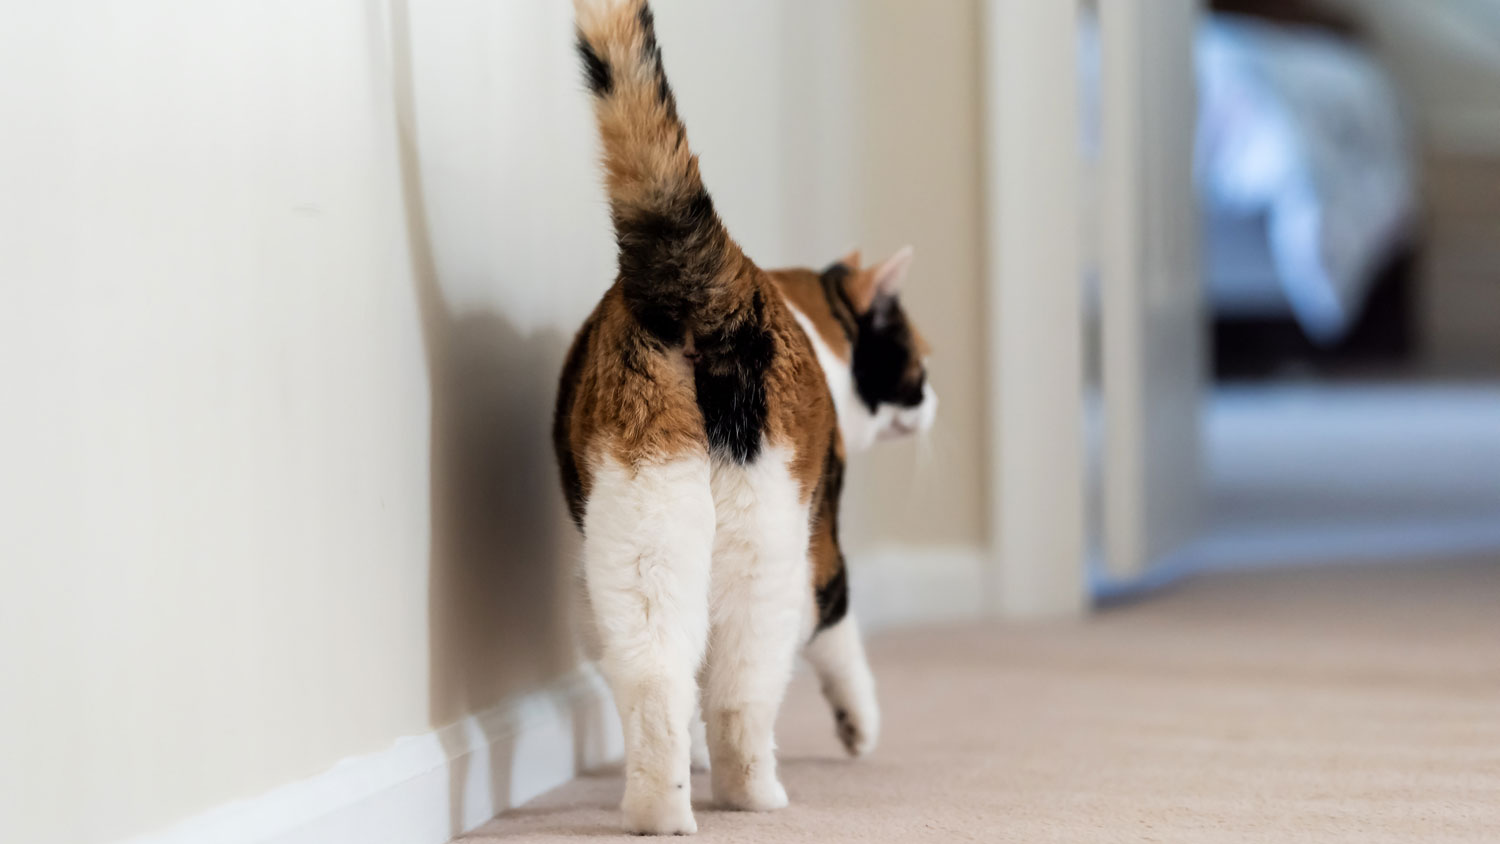 A calico cat with its tail in the air